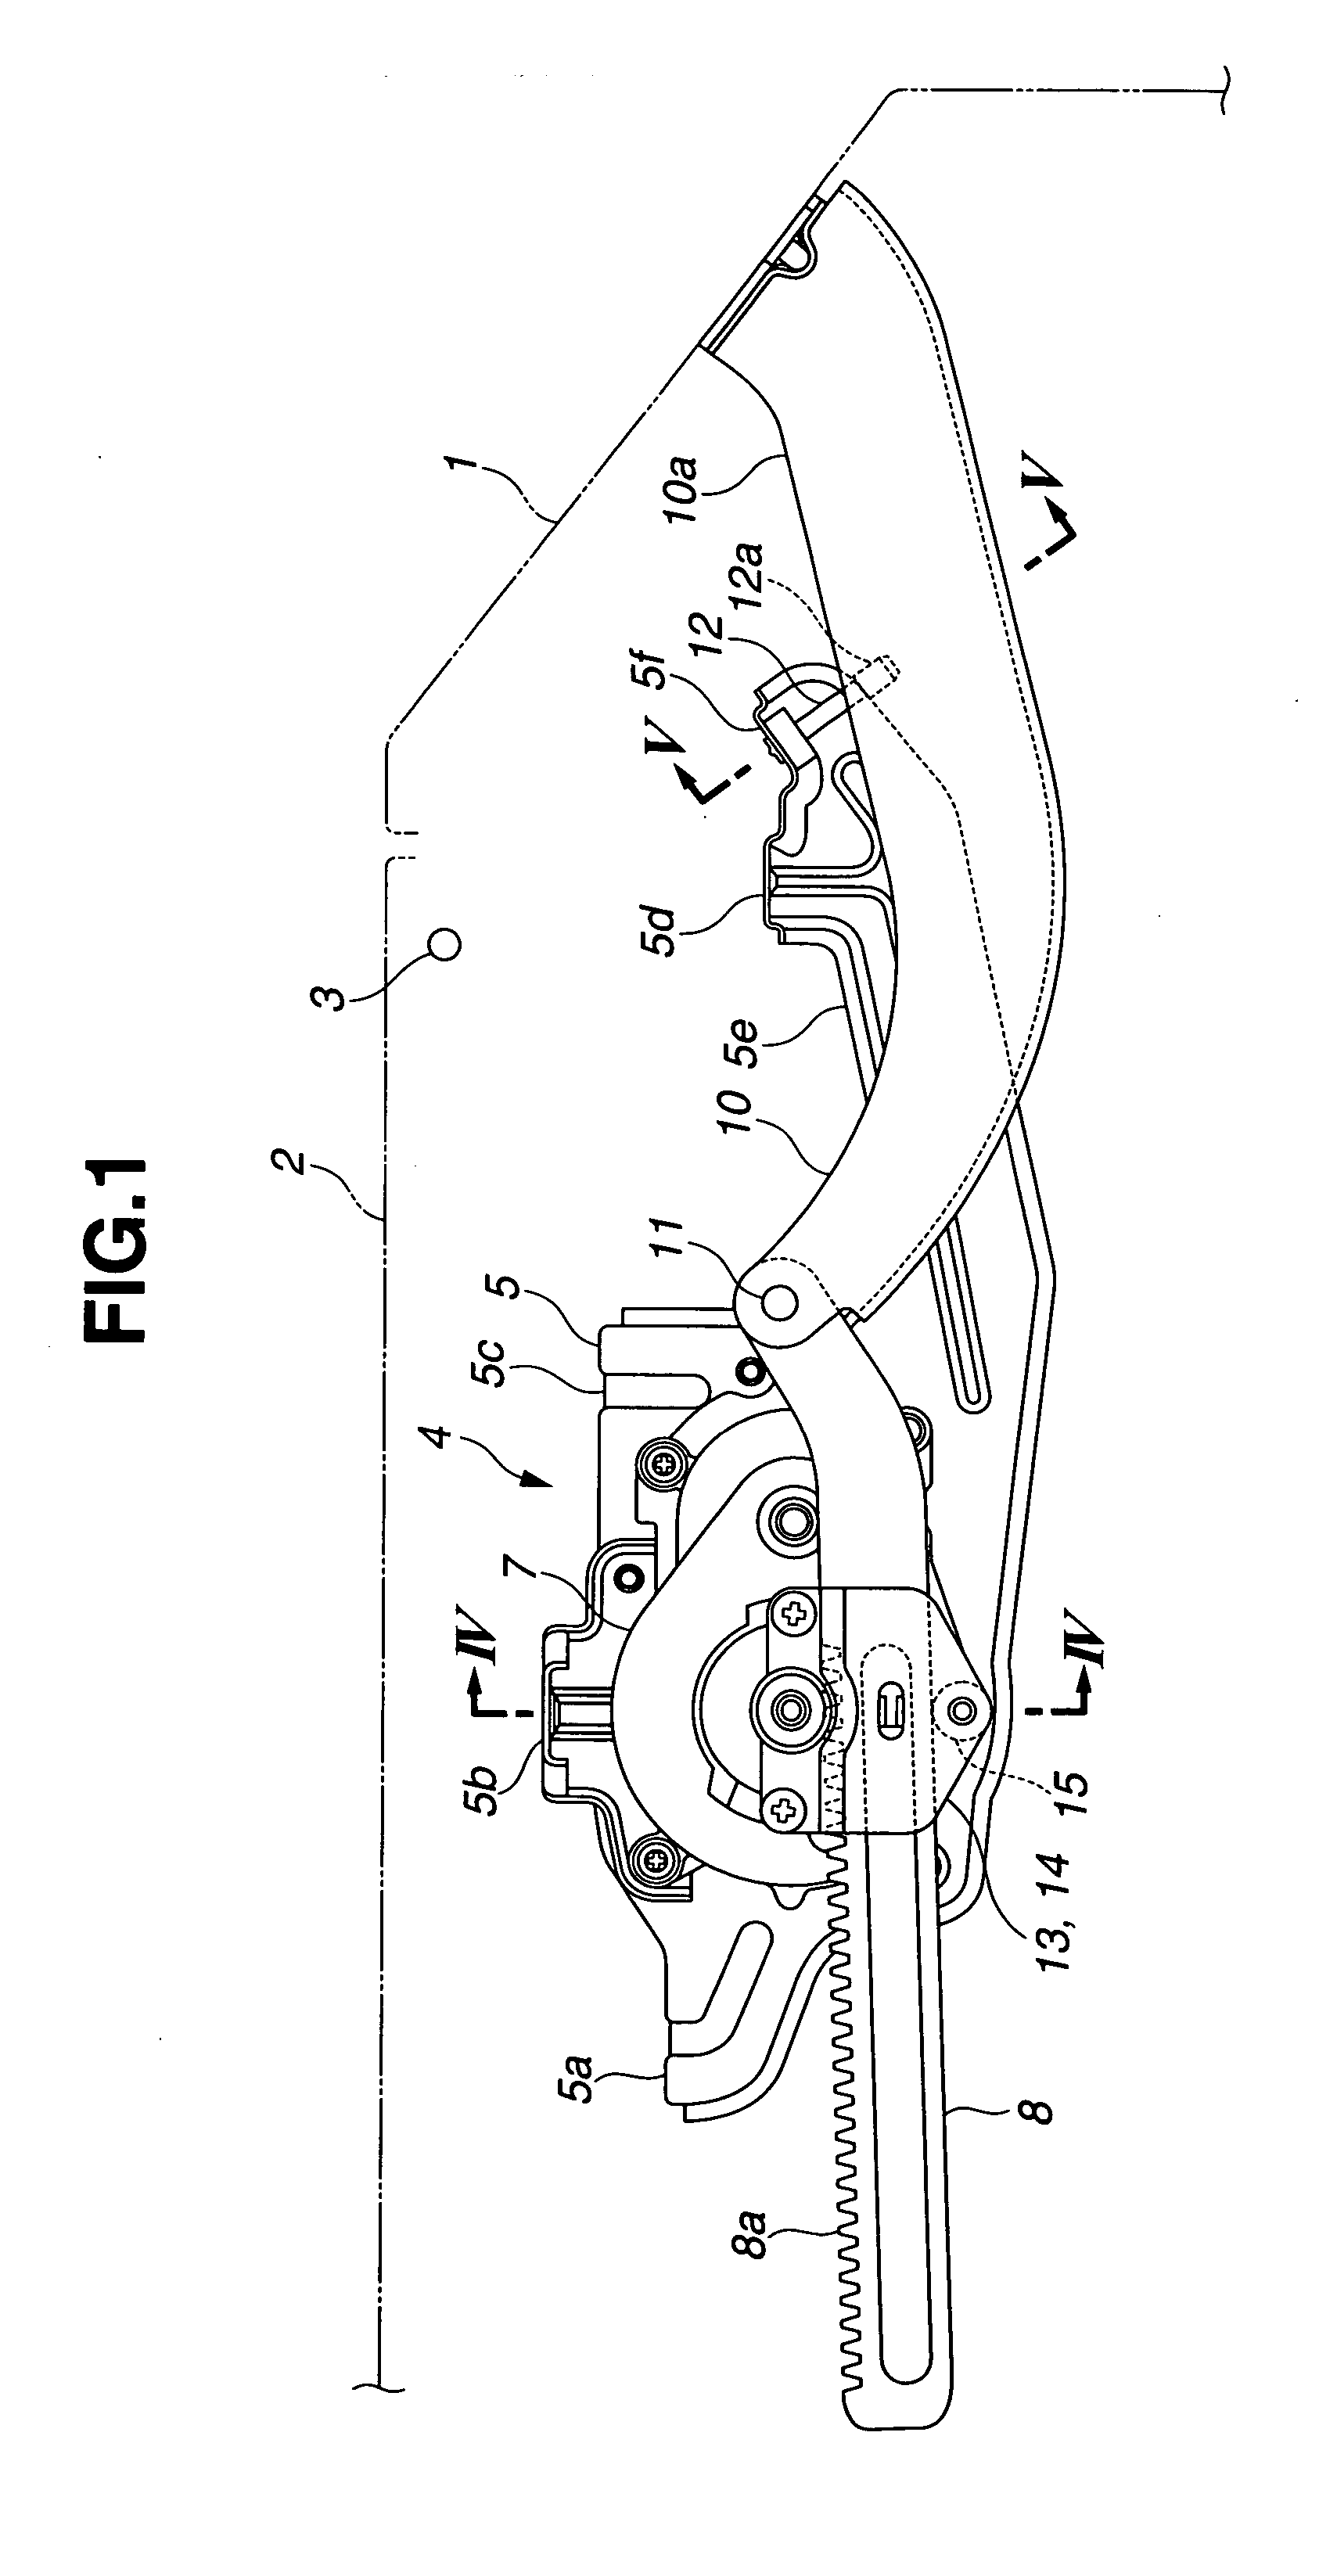 Opening and closing apparatus for opening and closing body of vehicle